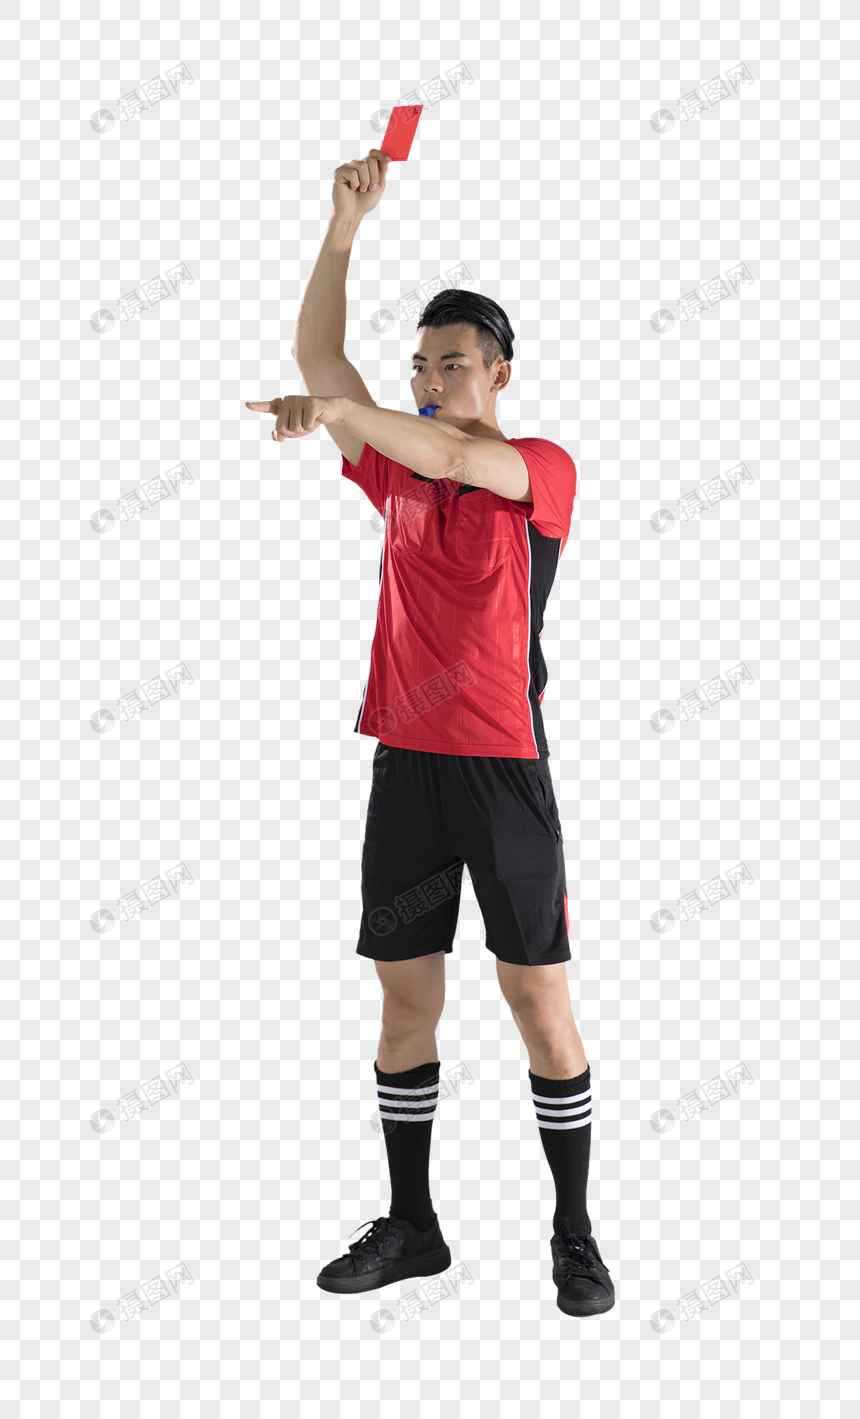 Football Referee PNG Image & PSD File Free Download - Lovepik Throughout Football Referee Game Card Template